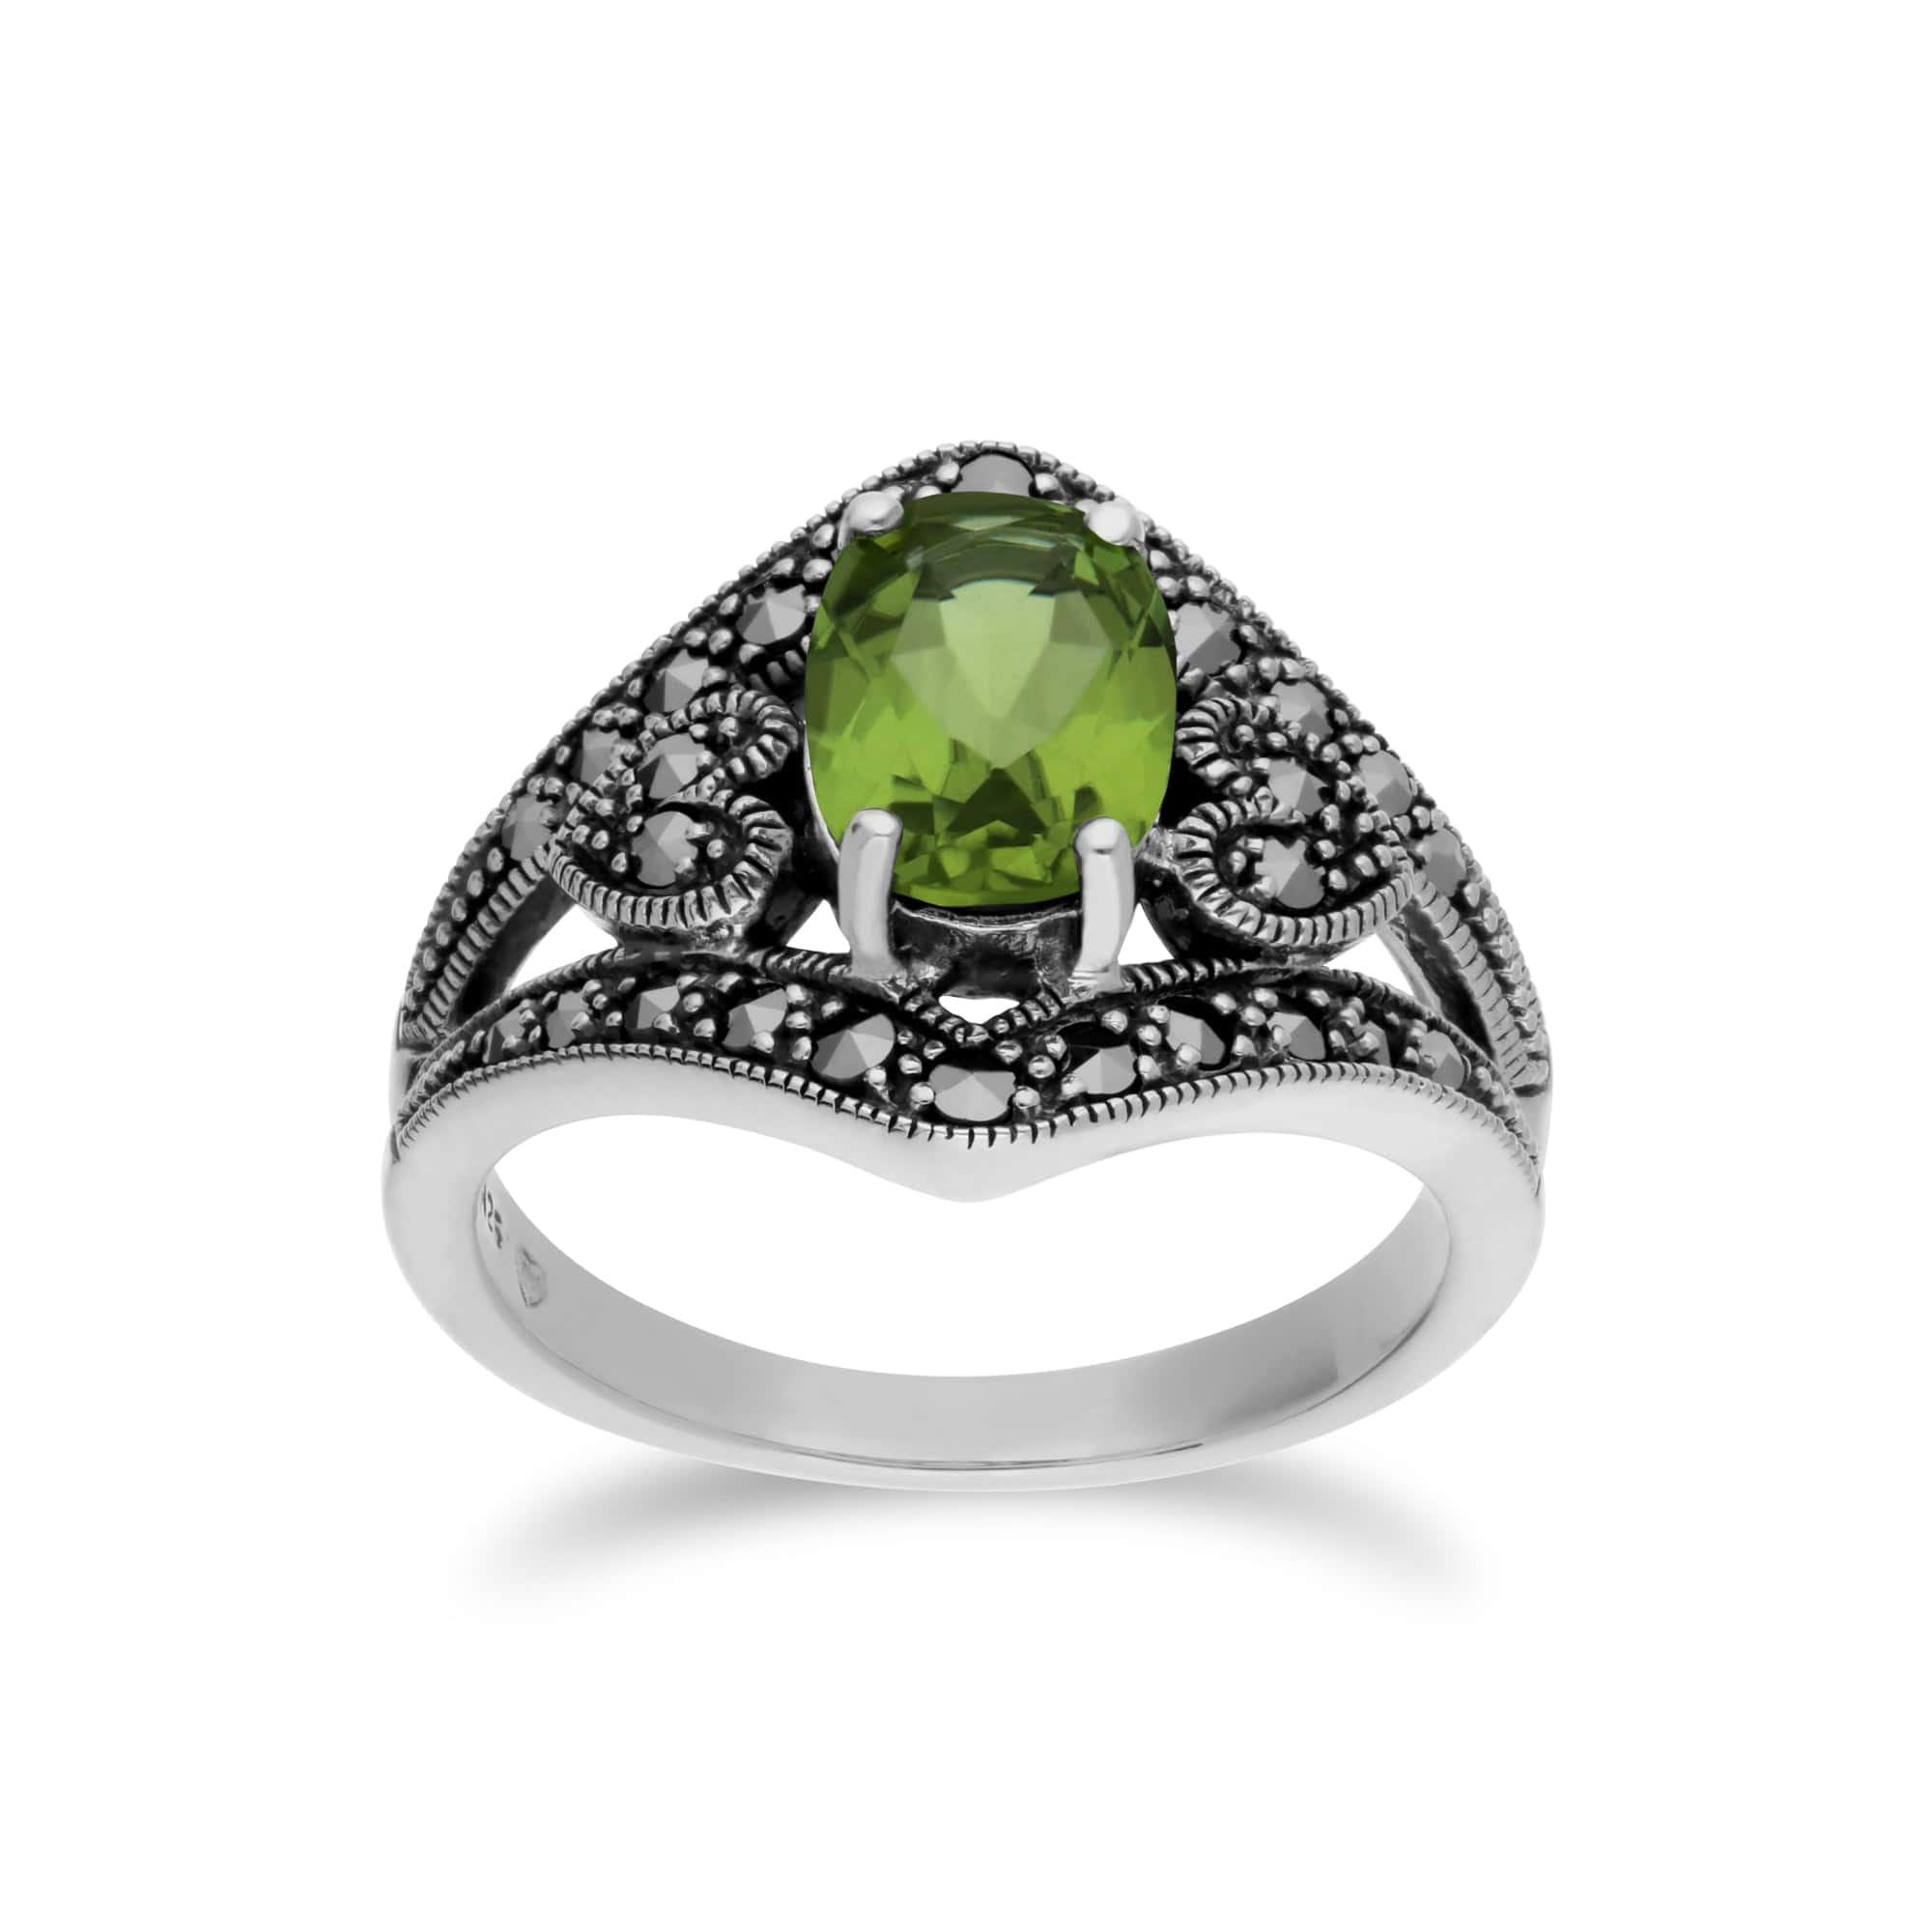 214R404904925 Art Deco Style Oval Peridot & Marcasite in 925 Sterling Silver 1